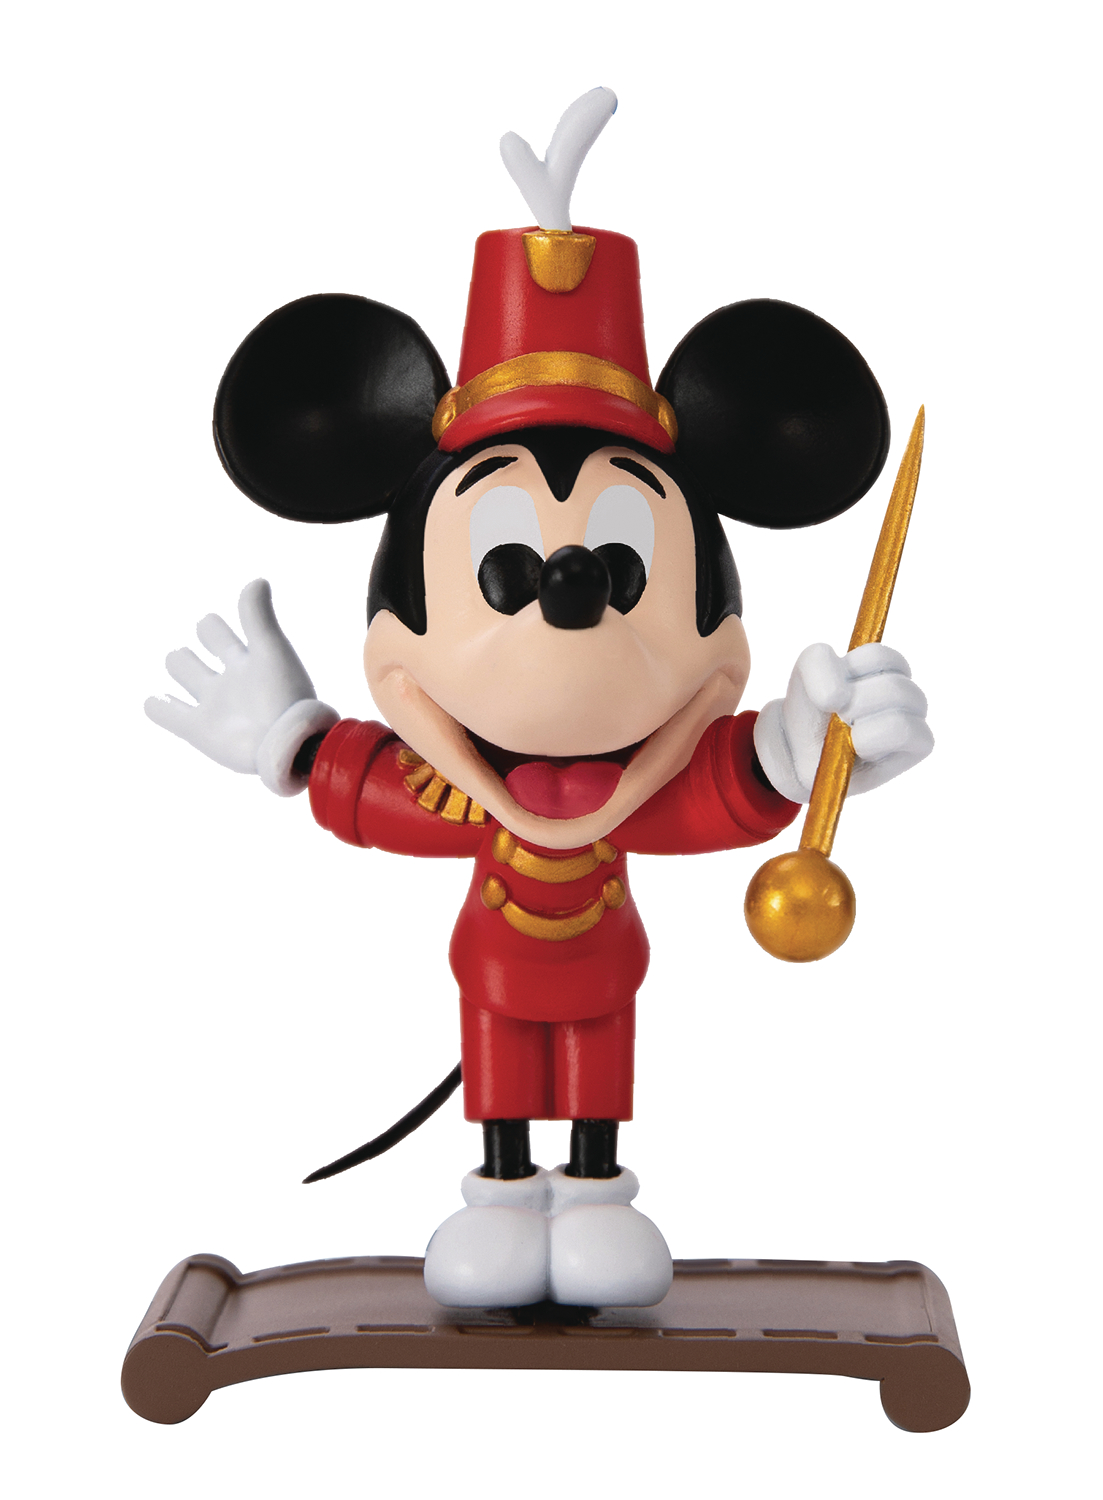 MICKEY 90TH ANNIVERSARY MEA-008 CIRCUS MICKEY PX FIG